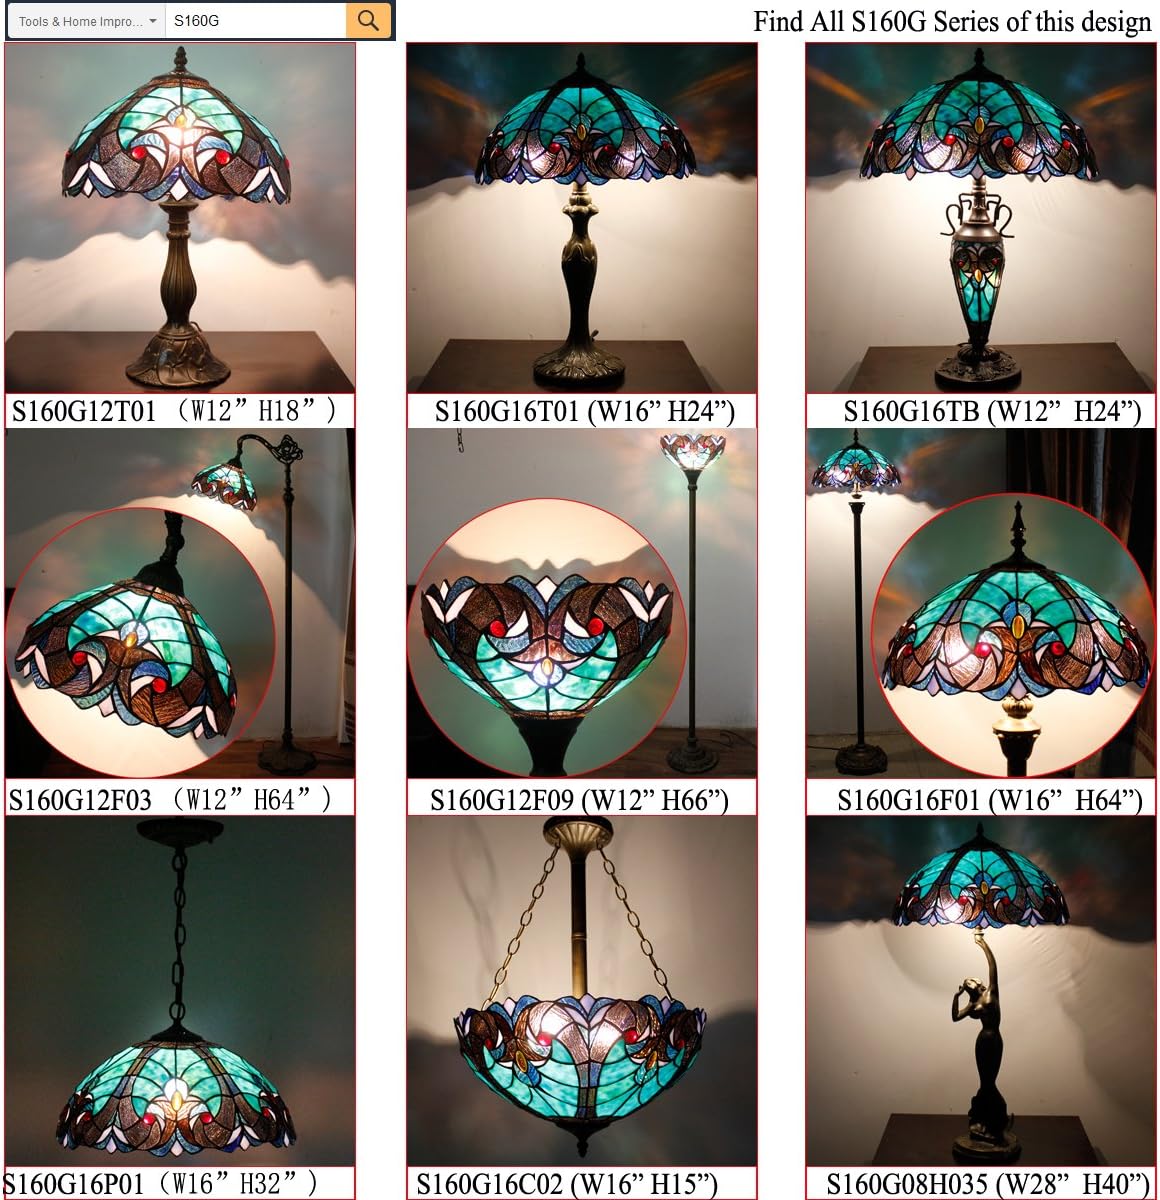 GEDUBIUBOO  Style Lamp Green Liaison Stained Glass Bedside Table Lamp 16X16X24 Inches Desk Light Metal Base Decor Bedroom Living Room  Office S160G Series Teal Purple